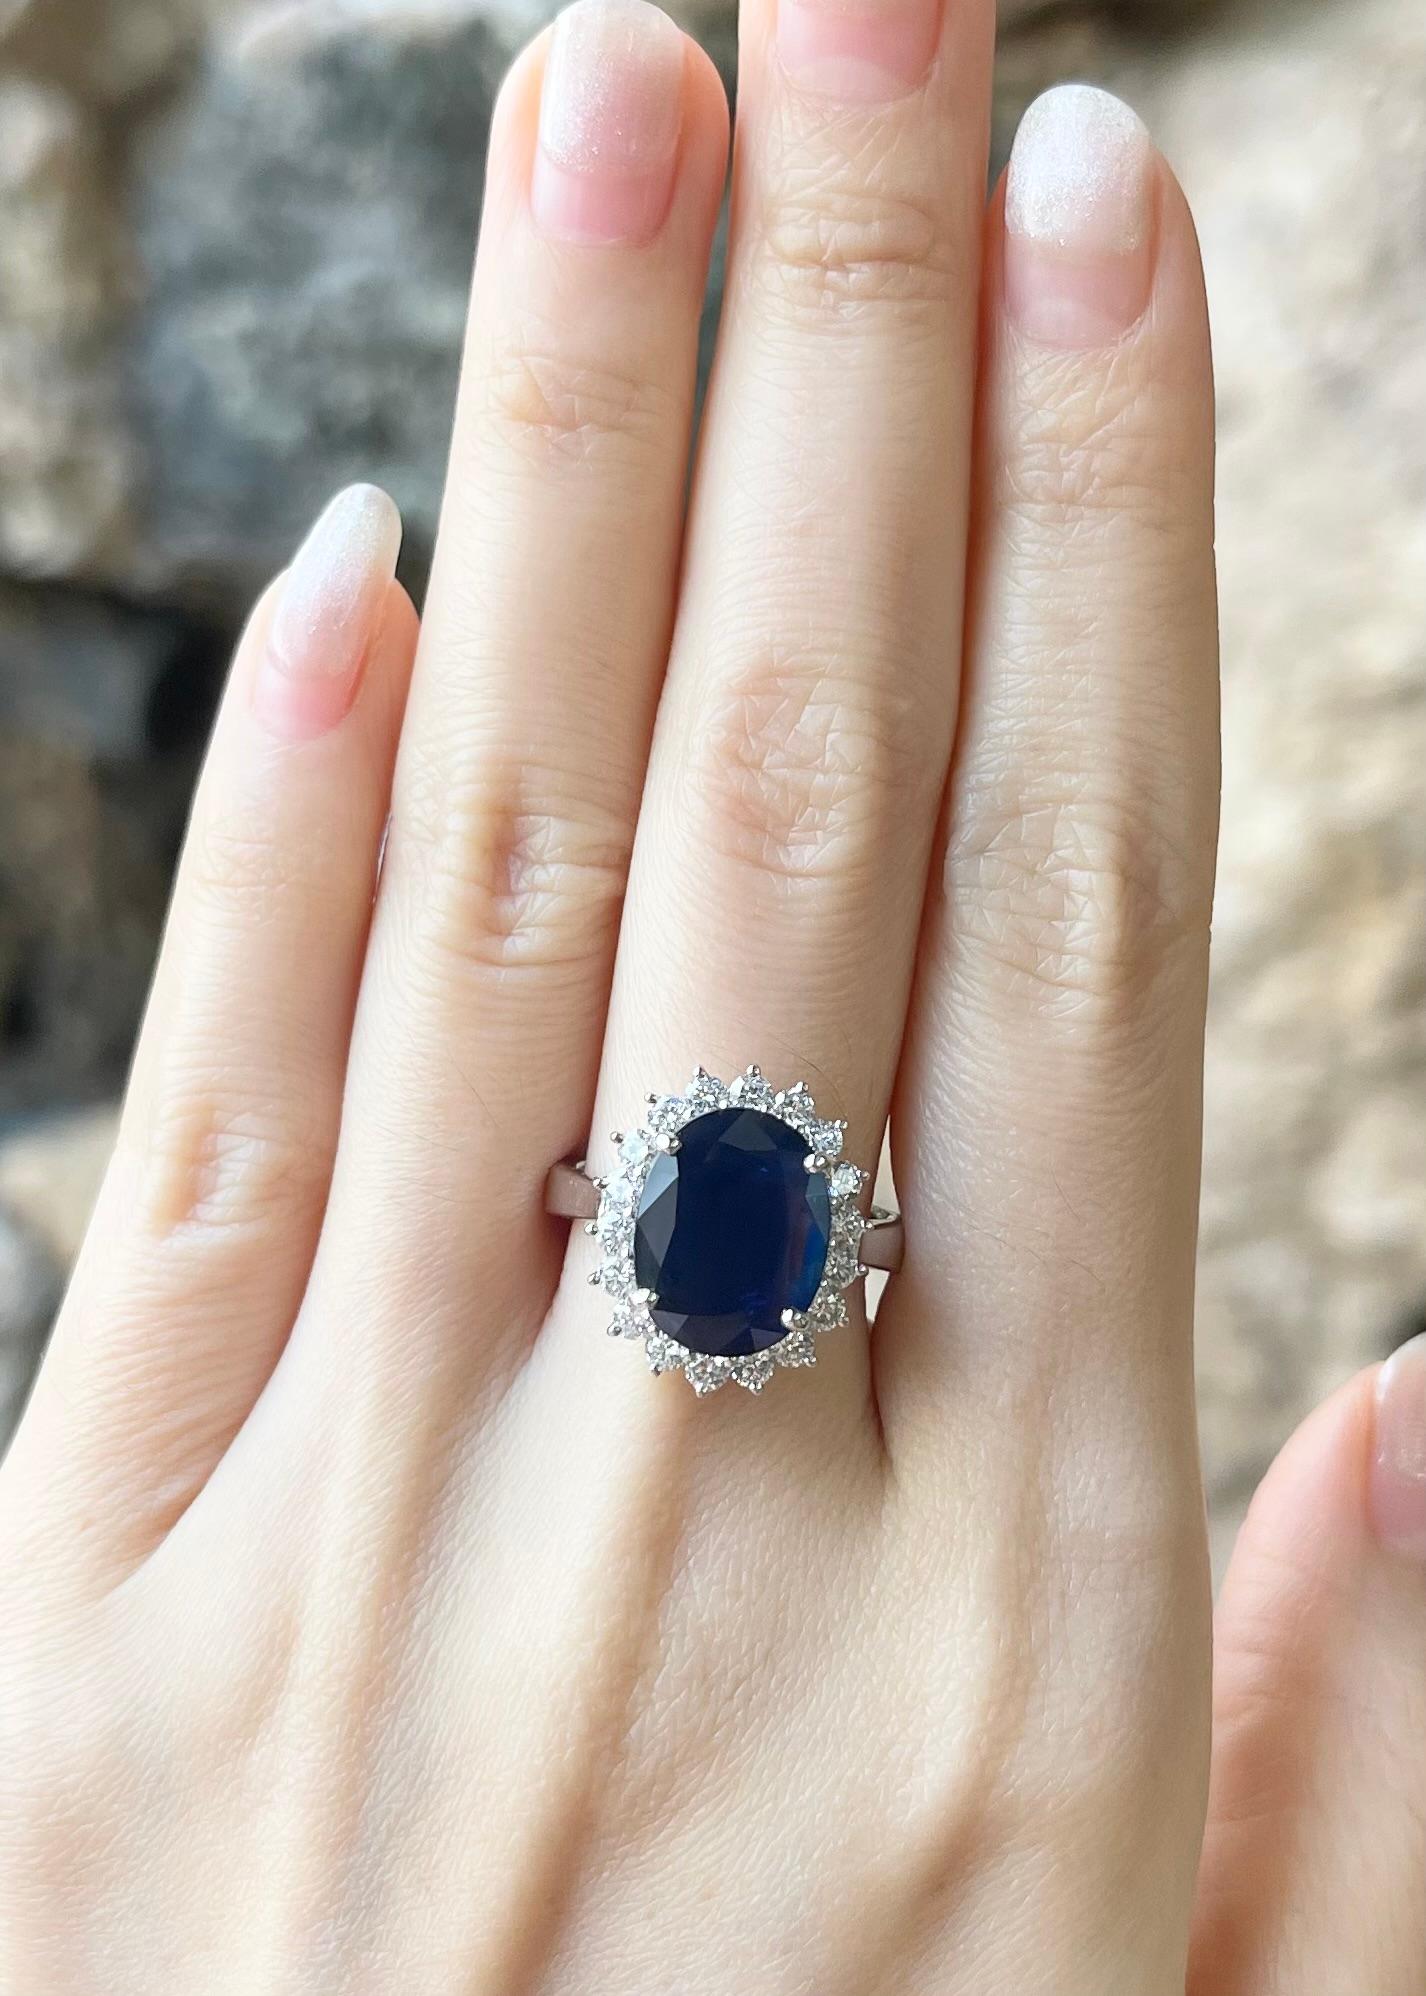 Blue Sapphire 4.25 carats with Diamond 0.81 carat Ring set in 18K White Gold Settings

Width:  1.4 cm 
Length: 1.8 cm
Ring Size: 54
Total Weight: 10.14 grams

